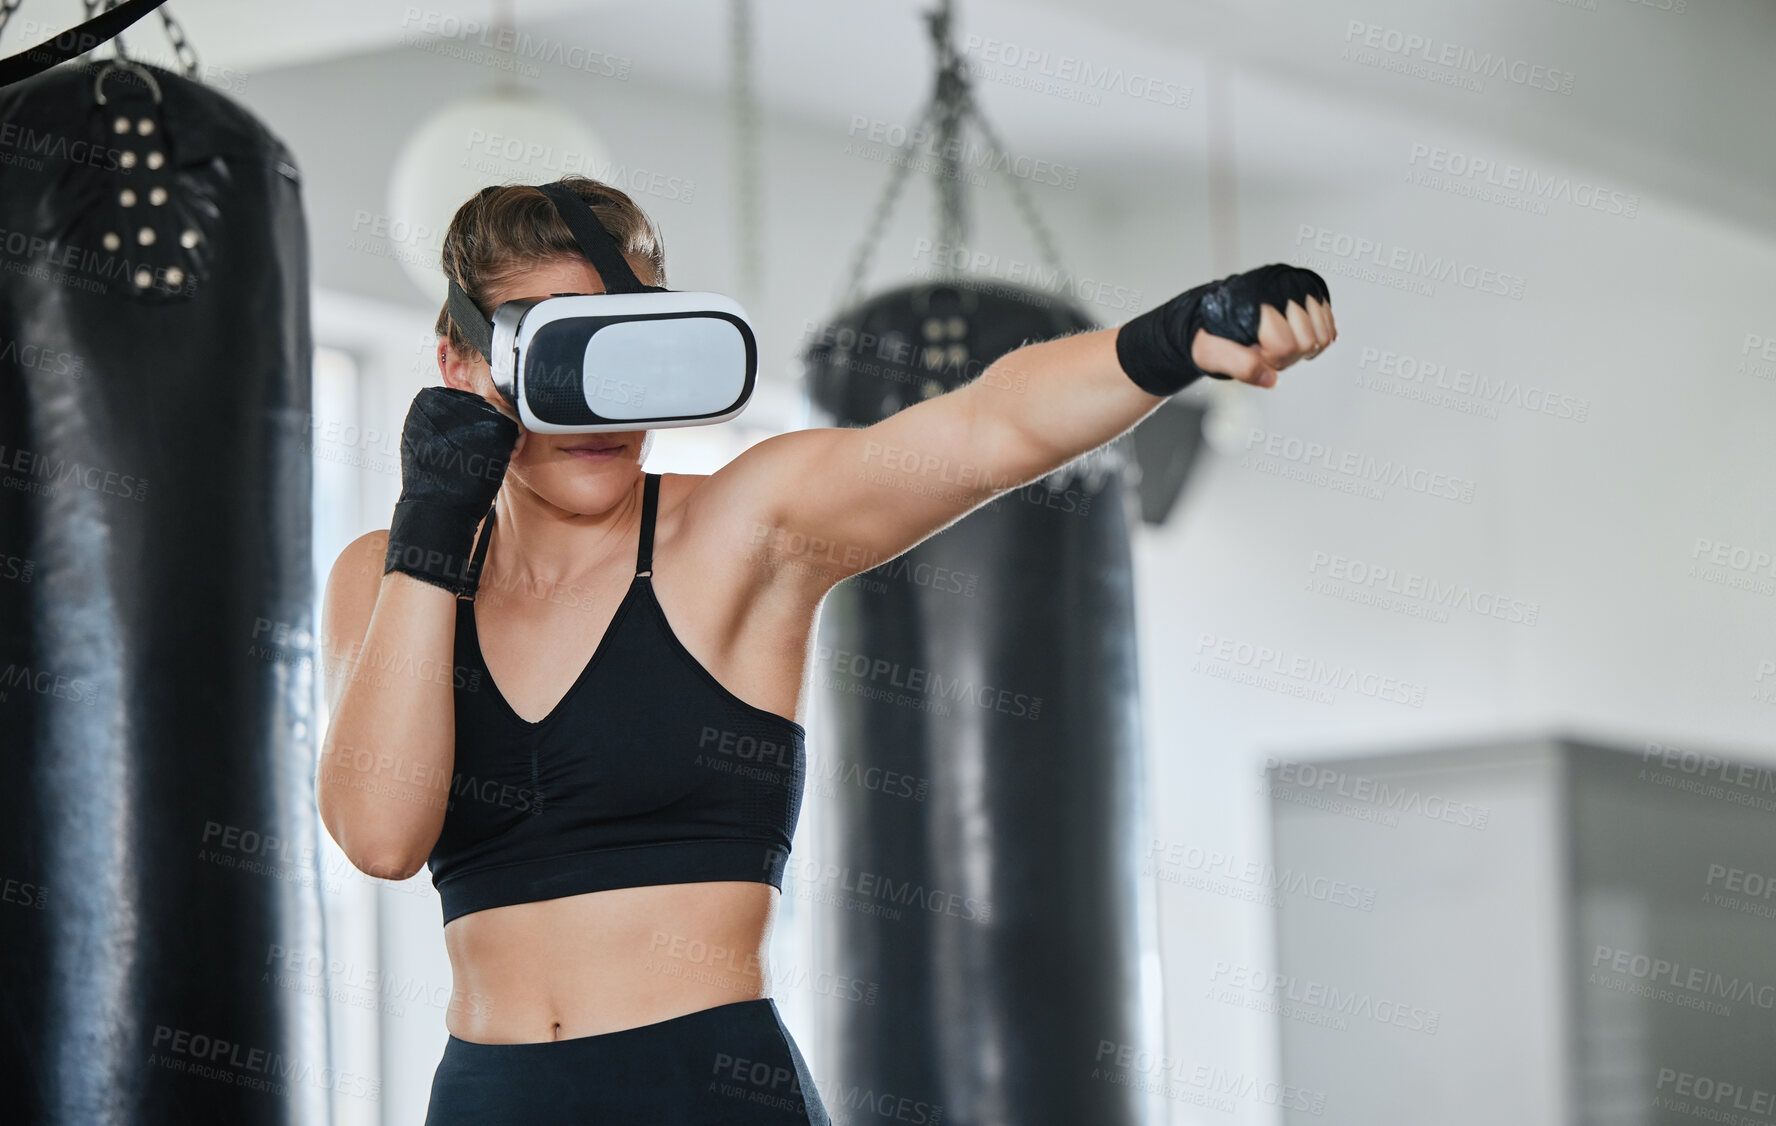 Buy stock photo Healthy, fit and active boxing woman with a VR headset to access the metaverse while exercising, training and working out in a gym. Female boxer doing a workout in virtual reality with technology.